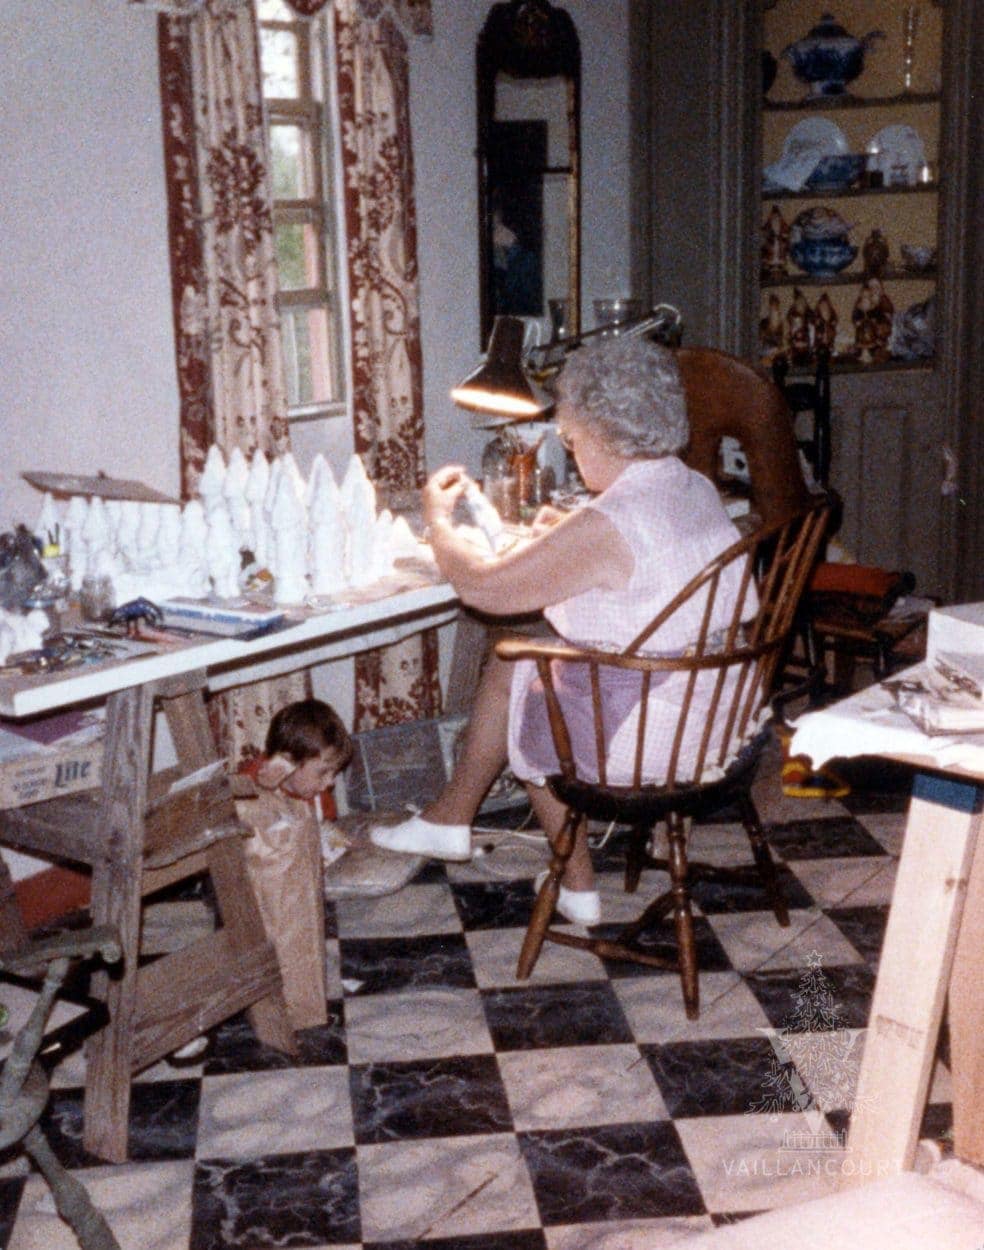 Judi's mother, Jessica, painting in the Vaillancourt's dining room in the mid 1980s (with son, Luke, playing under the painting desk).